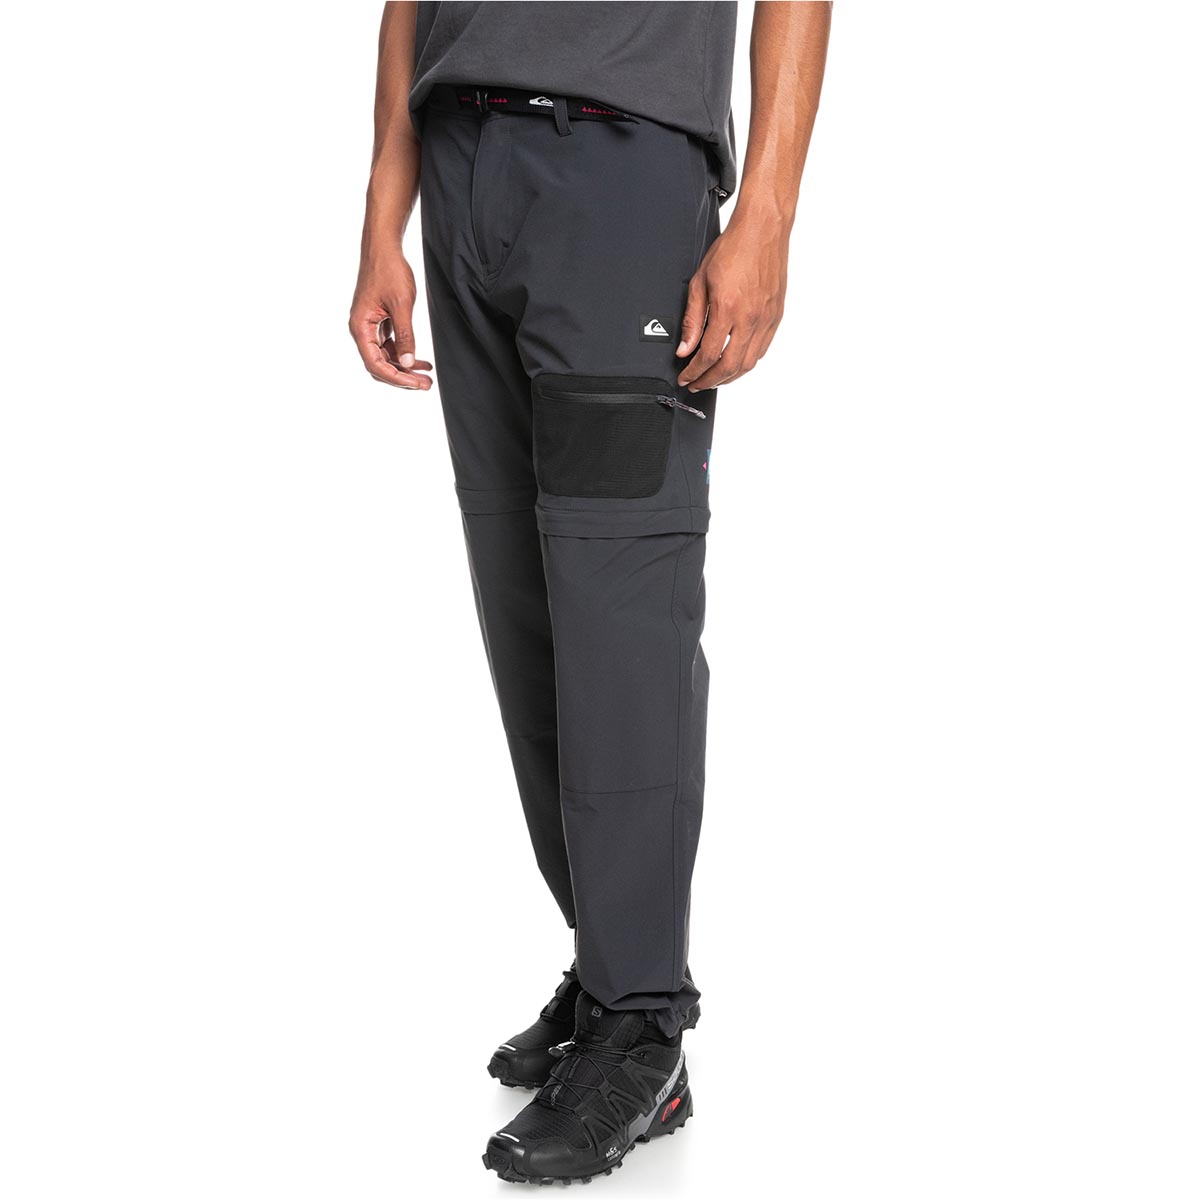 QUIKSILVER - TRANSITION IN MOTION ZIP OFF PANT